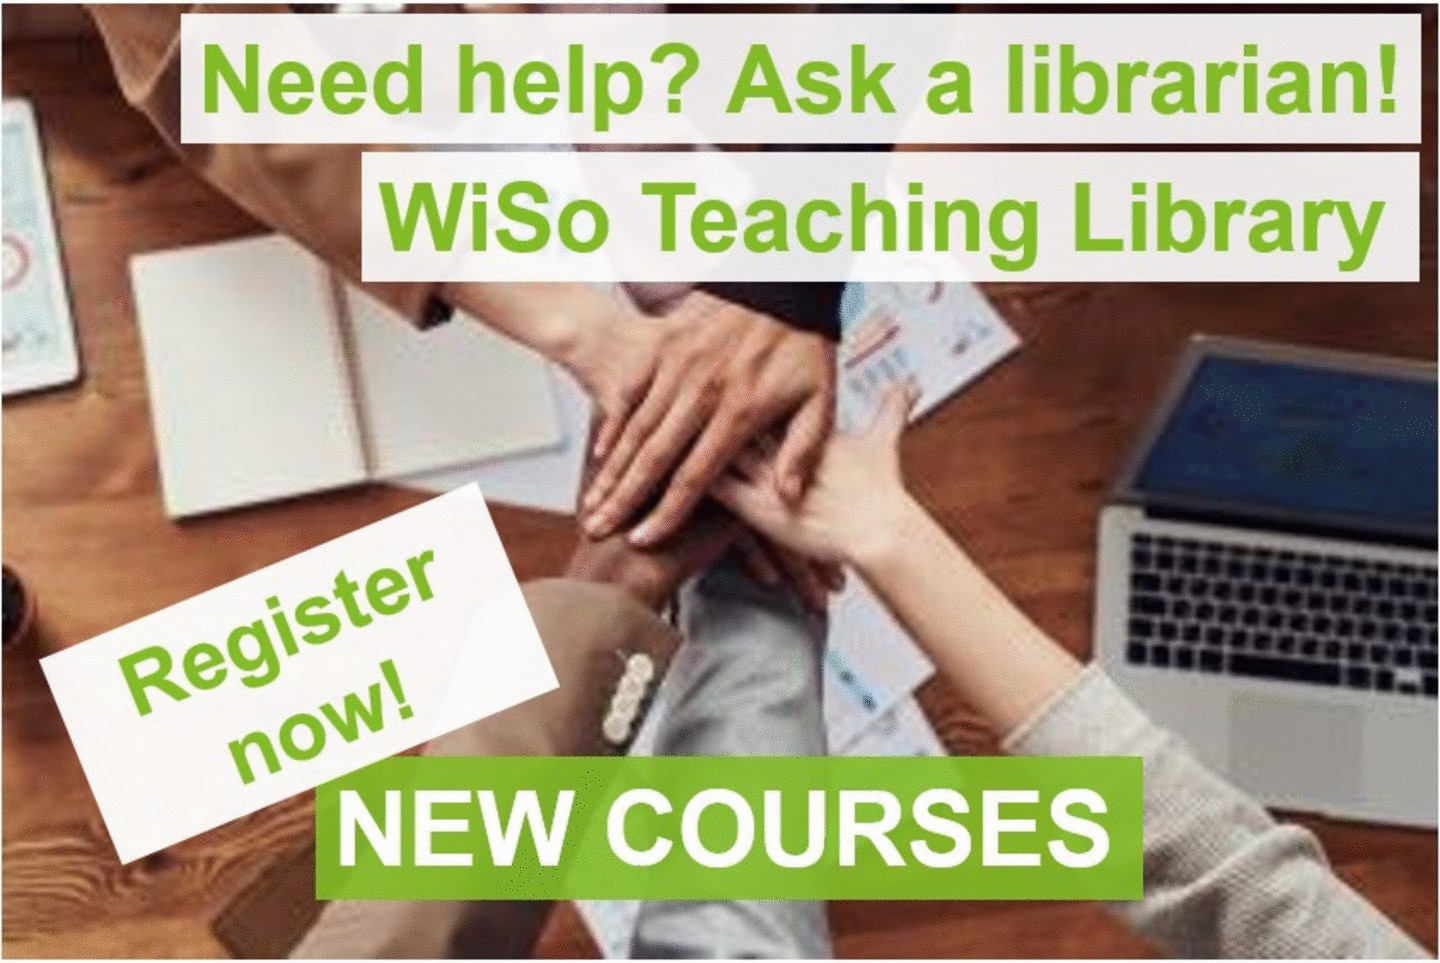 WiSo Teaching Library